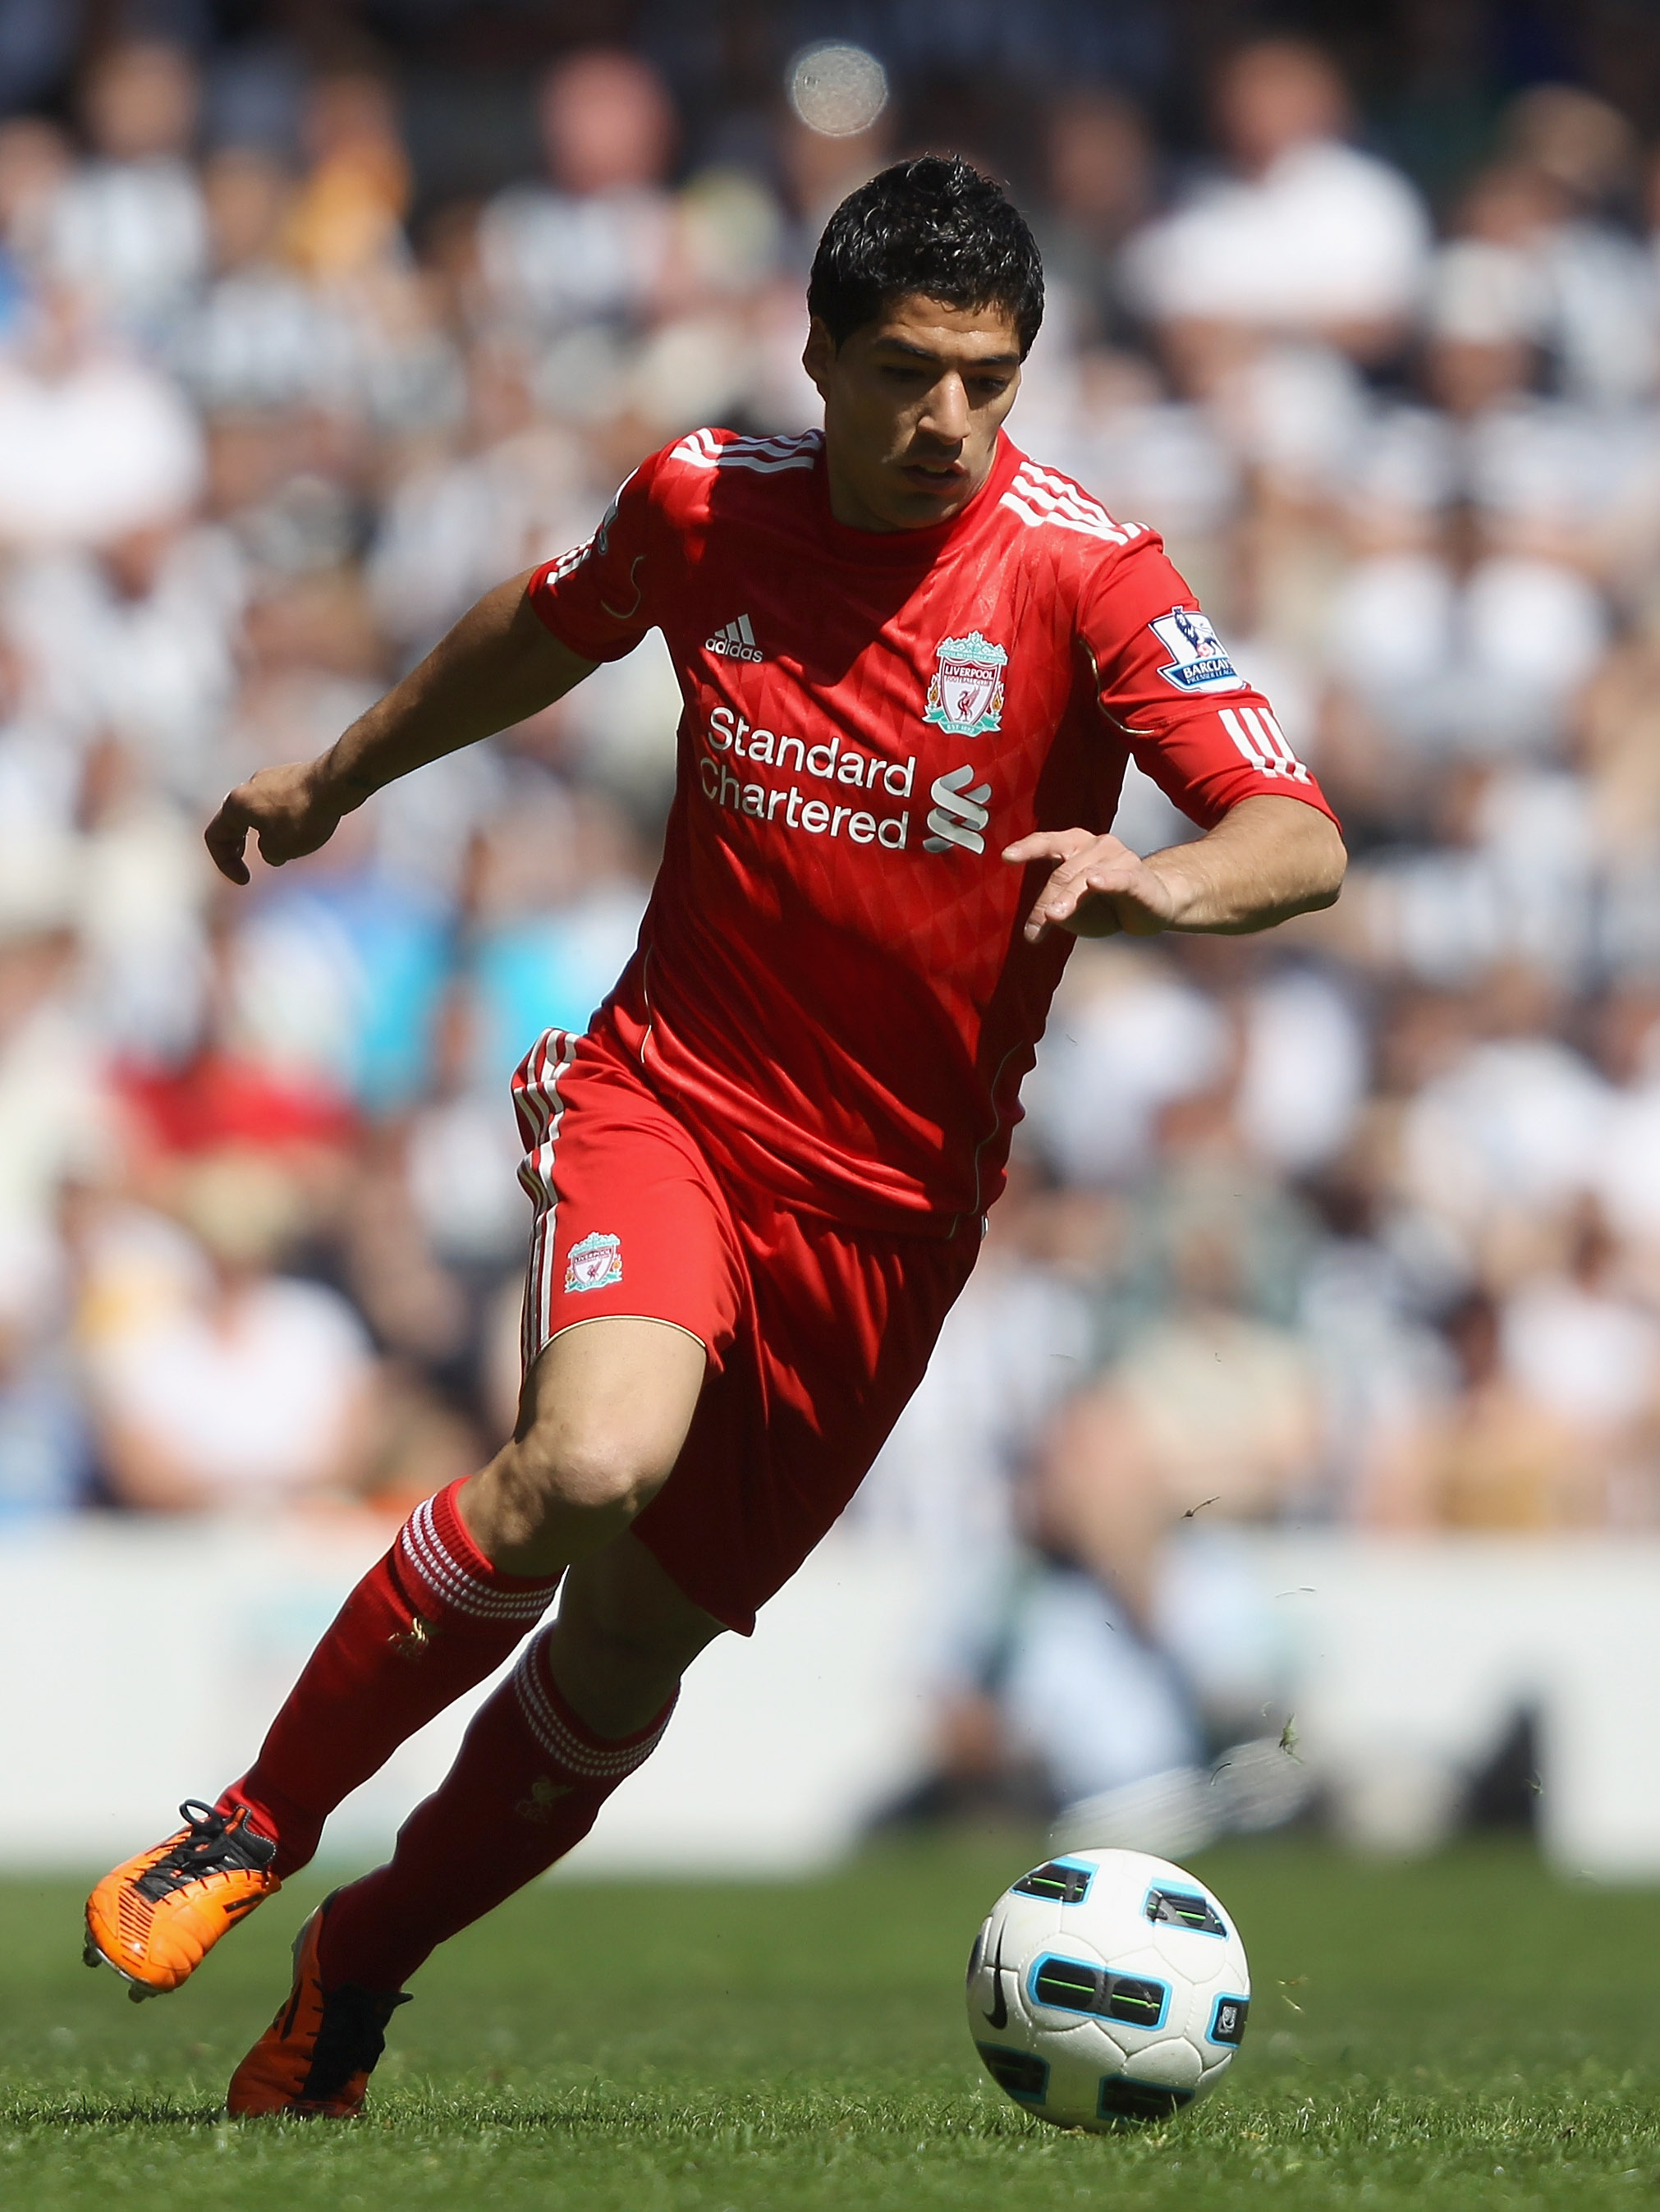 LIVERPOOL, ENGLAND - MAY 01:  Luis Suarez of Liverpool in action during the Barclays Premier League match between Liverpool  and Newcastle United at Anfield on May 1, 2011 in Liverpool, England.  (Photo by Clive Brunskill/Getty Images)